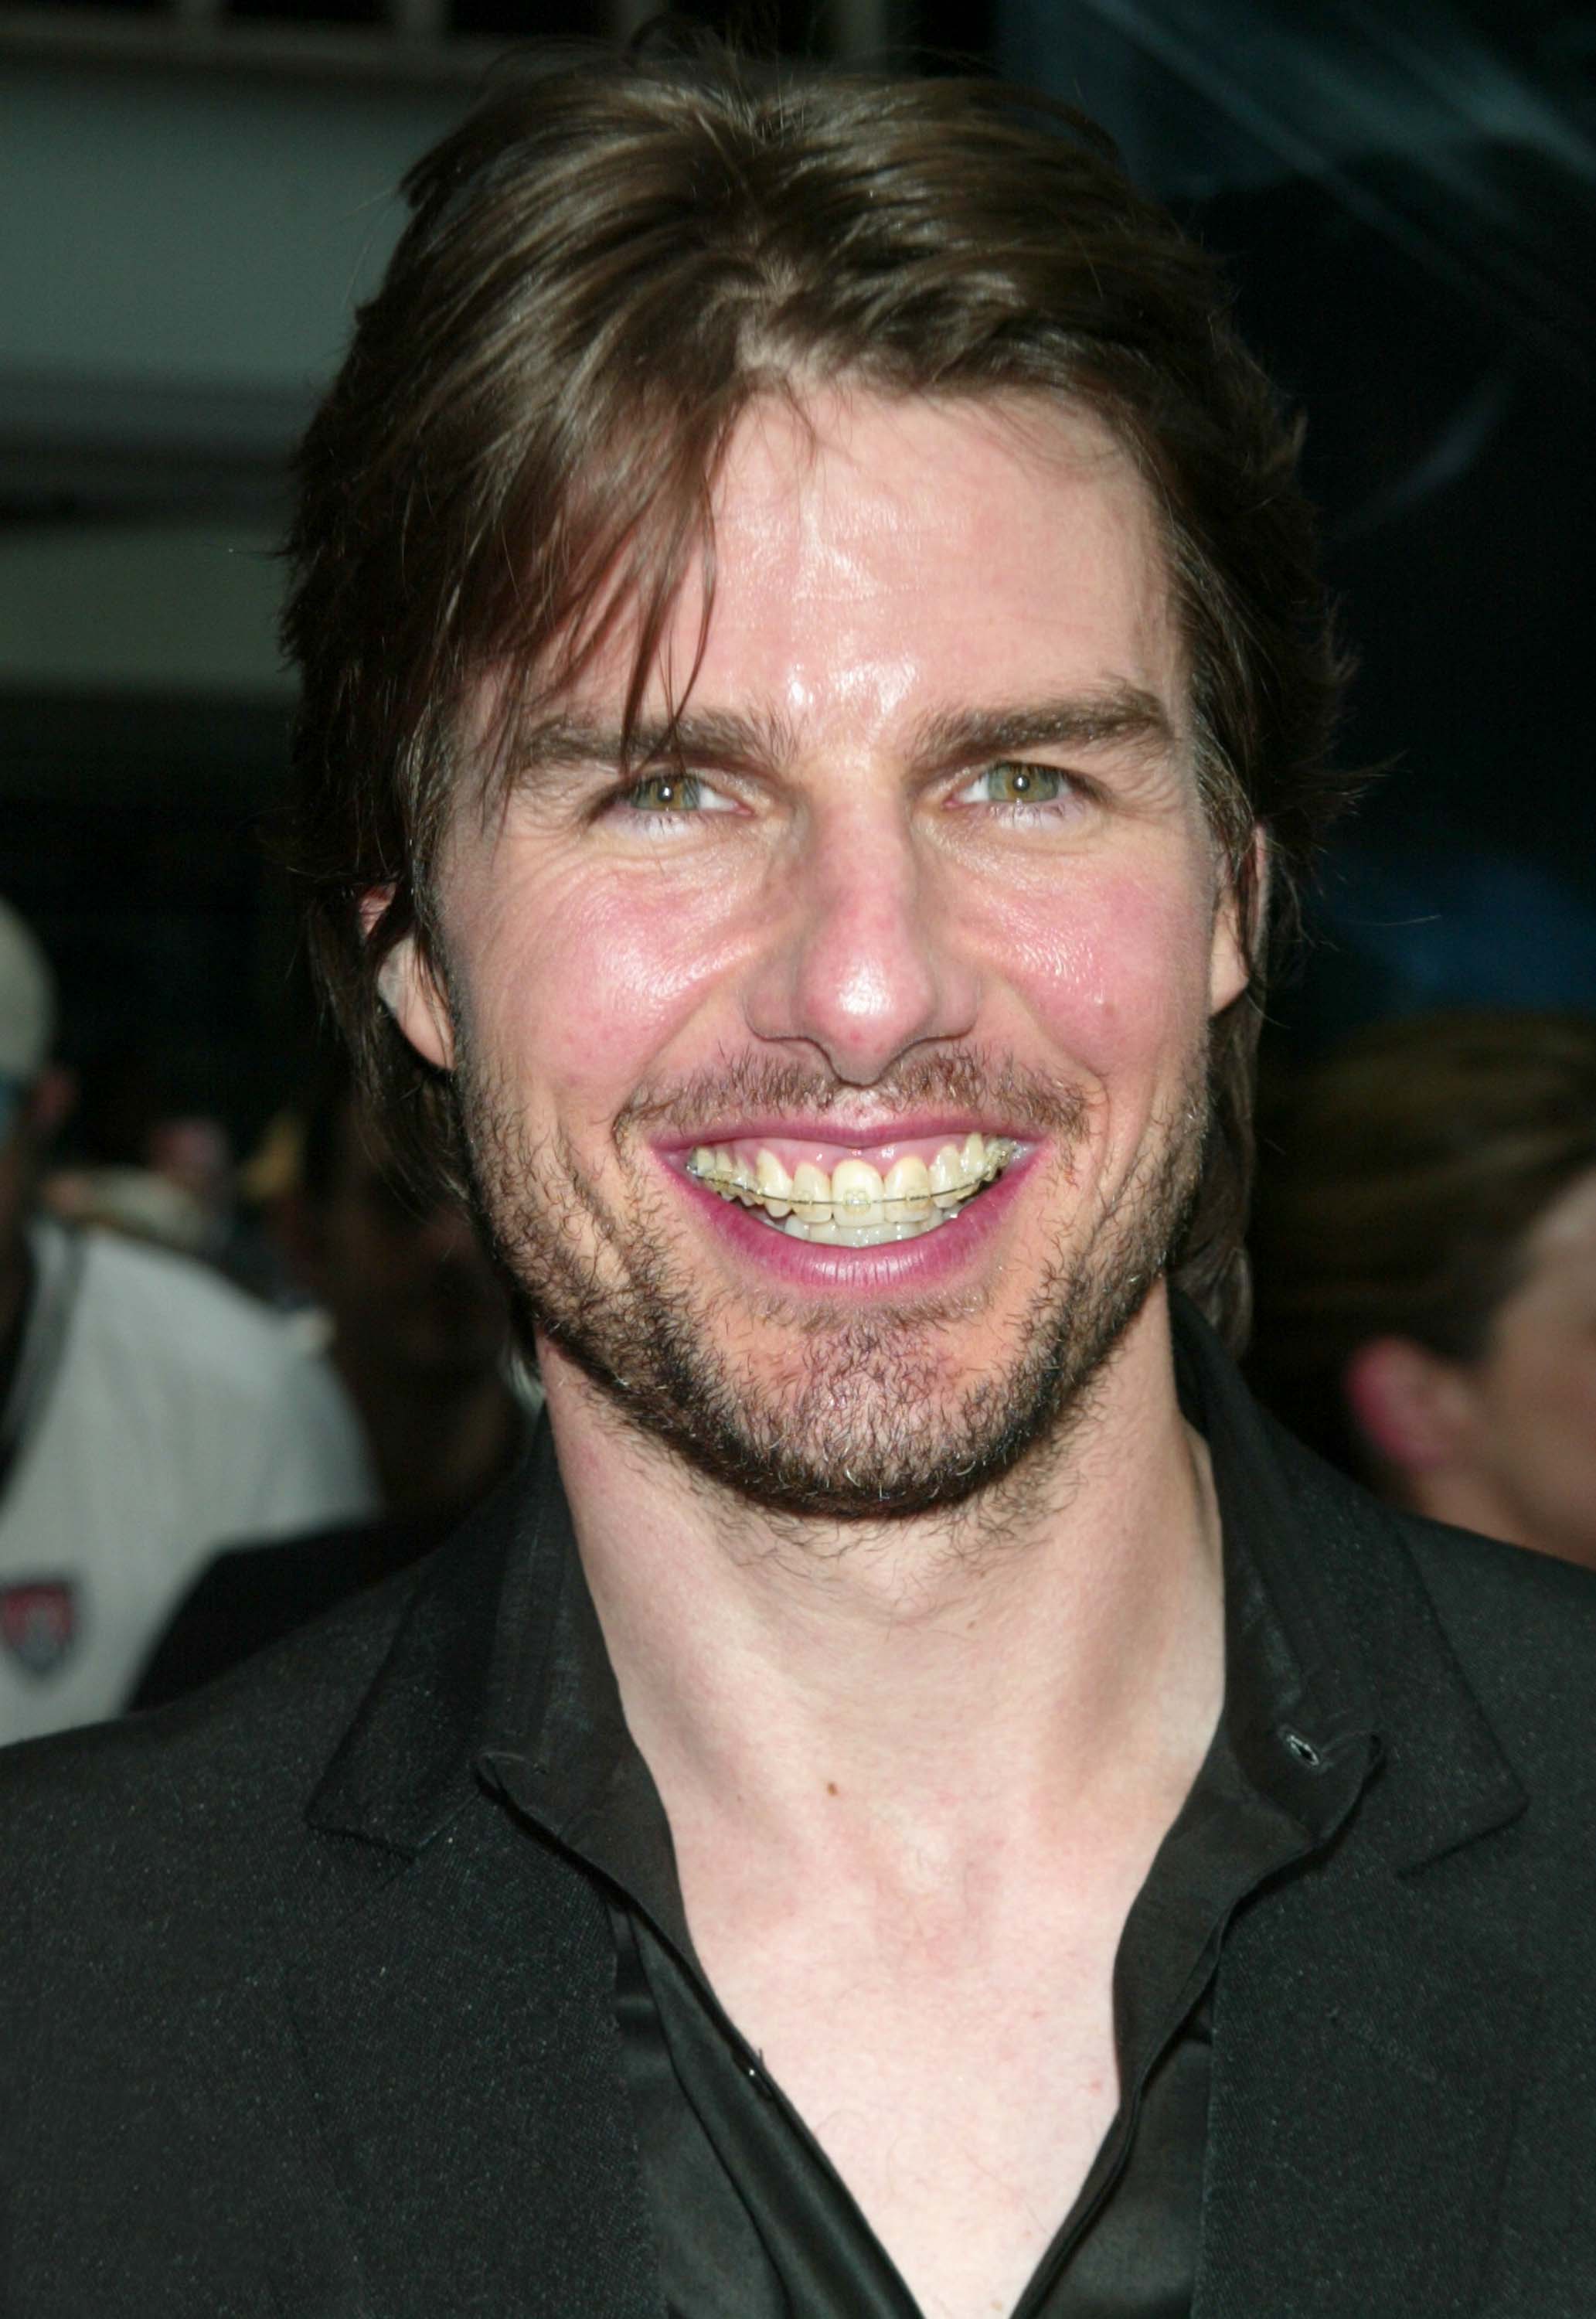 Tom Cruise at the premiere of "Minority Report" on June 17, 2002, in New York City. | Source: Getty Images